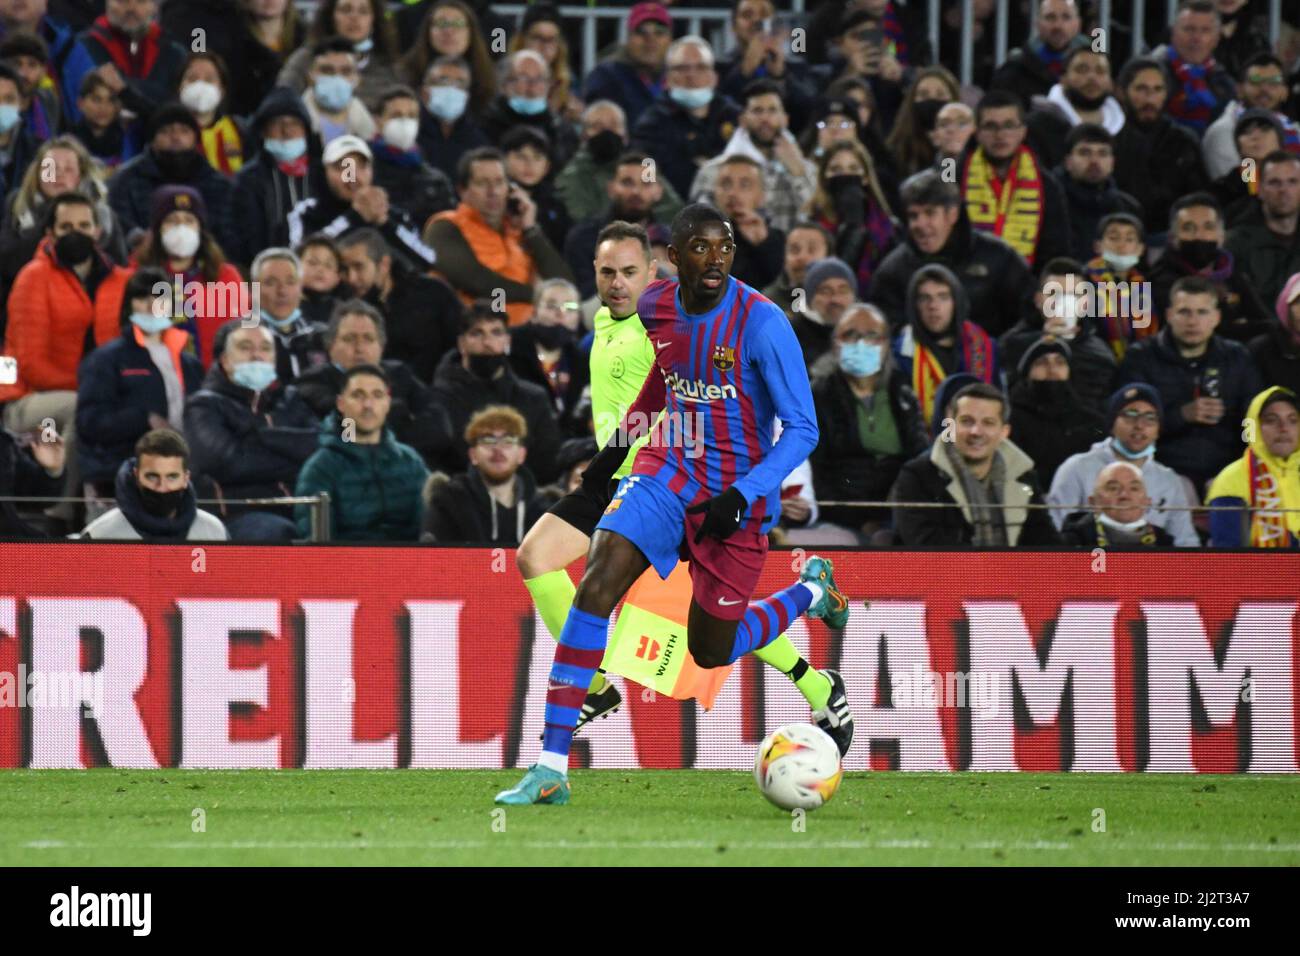 BARCELONA, SPAIN - APRIL 3: Ousmane Dembélé of FC Barcelona drives the ball during La Liga match between FC Barcelona and Sevilla FC at Campo Nou on April 3, 2022 in Barcelona, Spain. (Photo by Sara Aribó/Pximages) Credit: Px Images/Alamy Live News Stock Photo